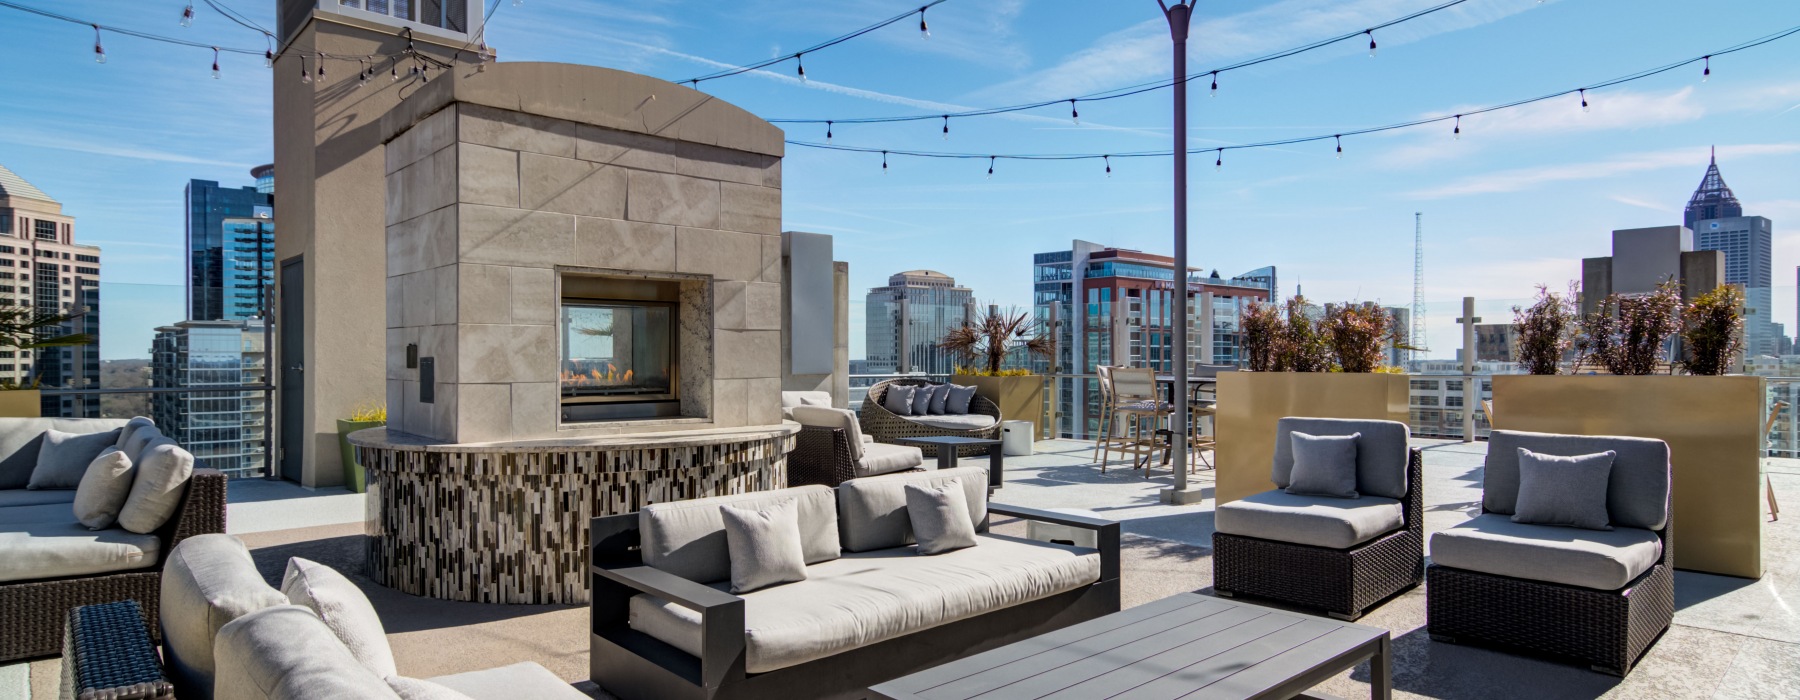 rooftop lounge with fireplace